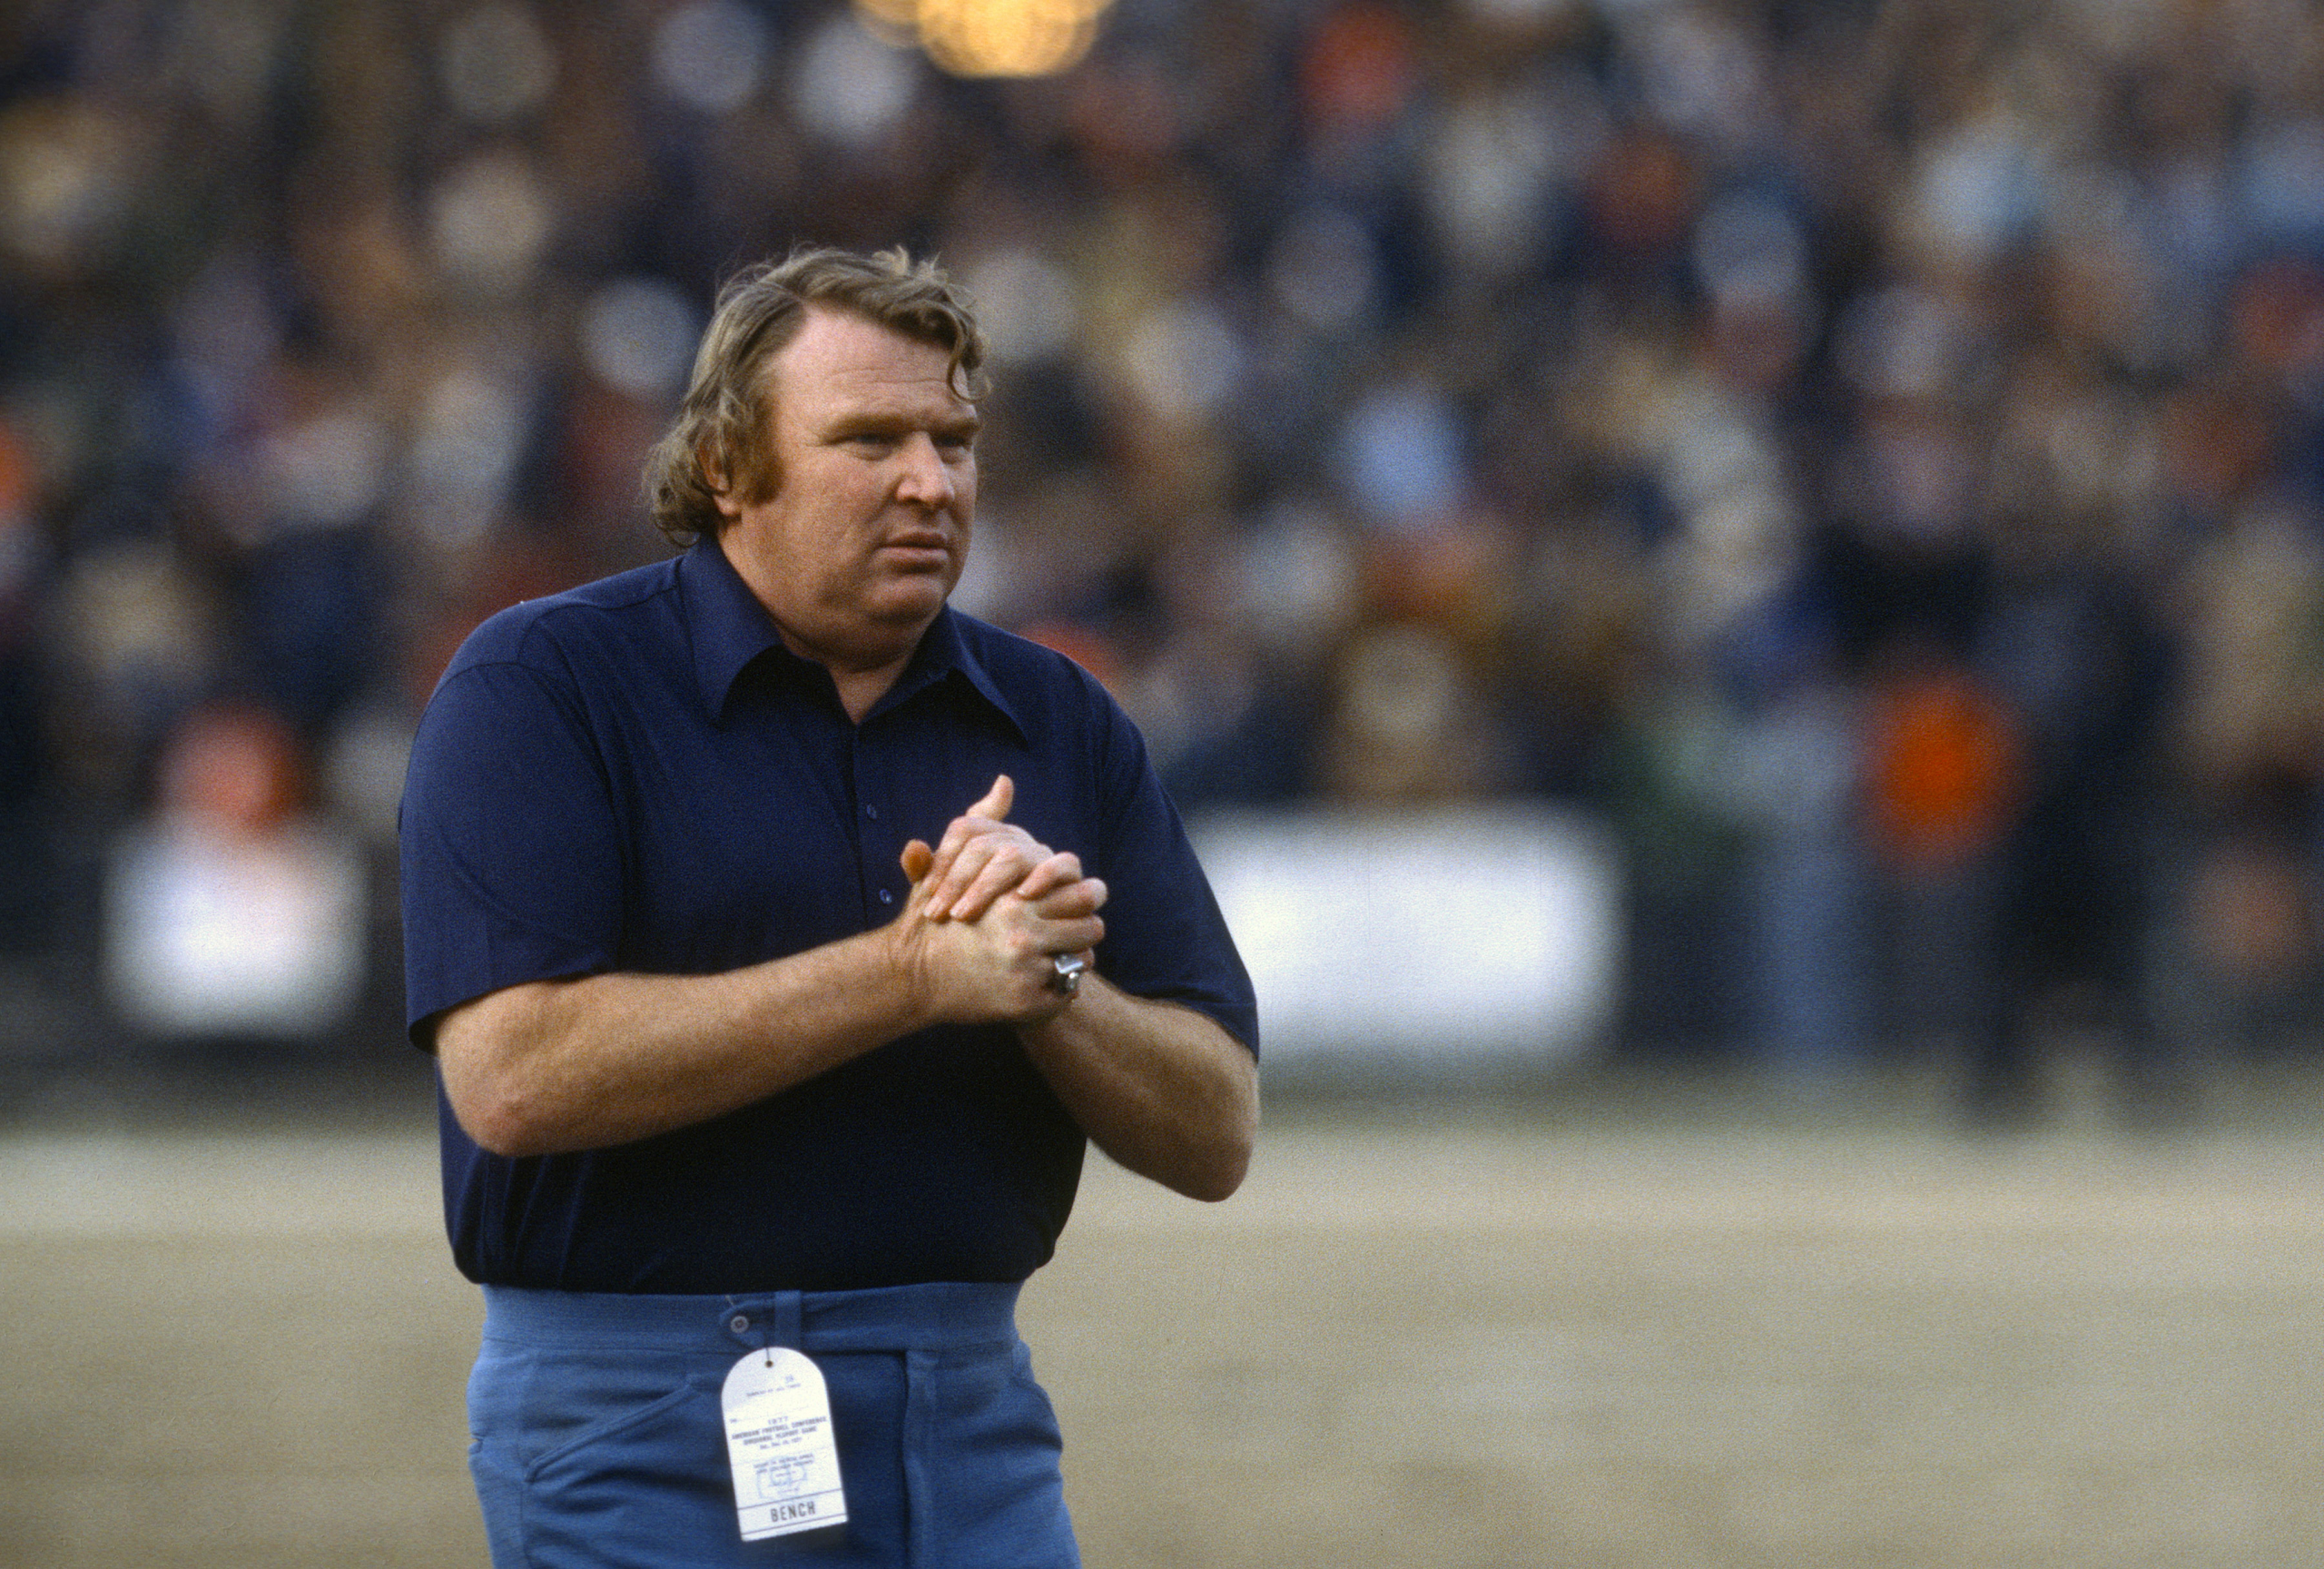 An American Icon Passes: John Madden Dead at 85